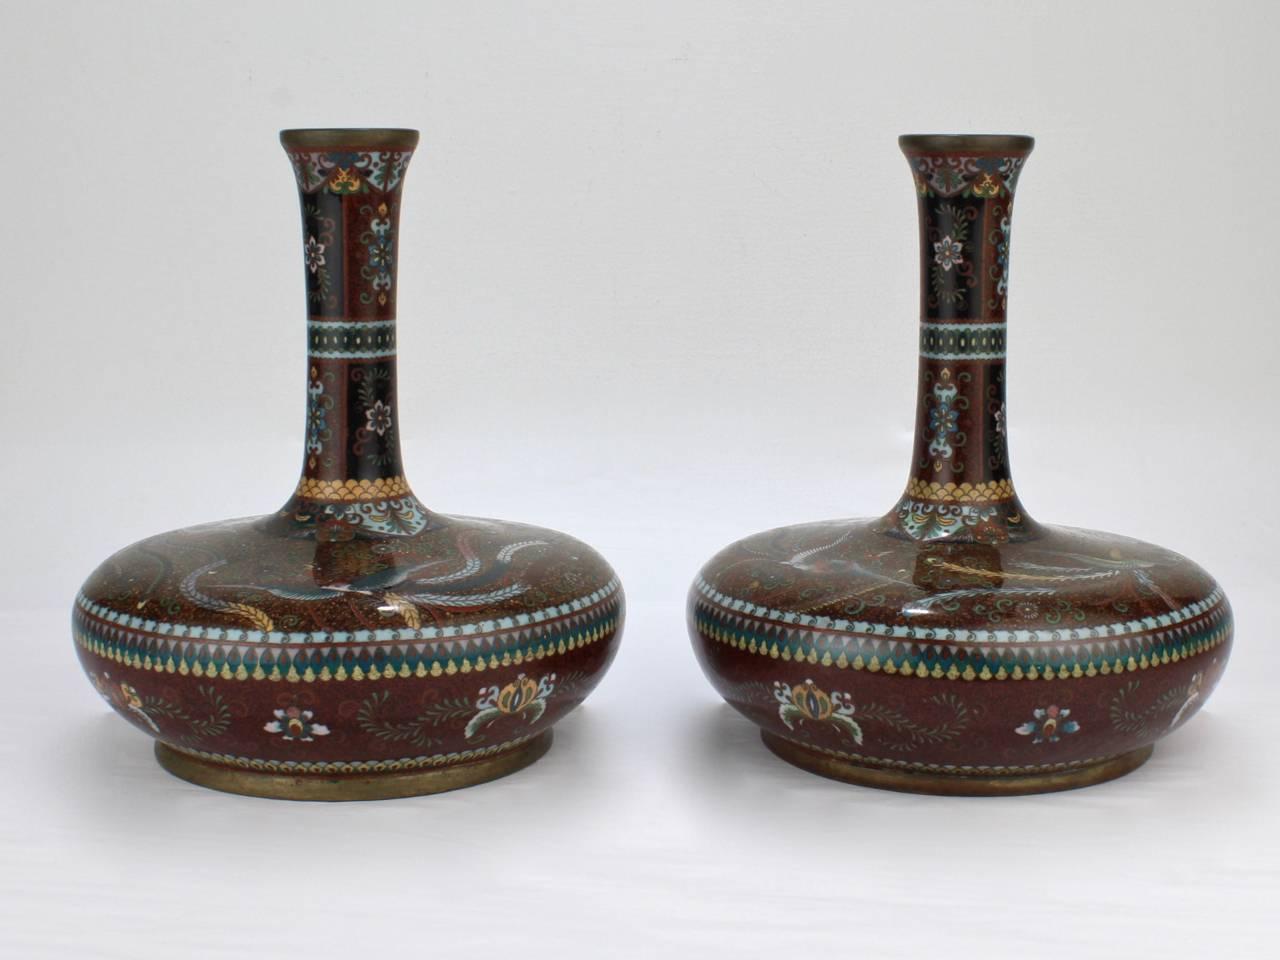 A good pair of antique Japanese large-scale Meiji period cloisonné vases.

Of very rare mallet or suppressed bottle form with rich goldstone ground and phoenix decoration. 

Measures: Height circa 9 3/4 in.

Purchases may be returned for any